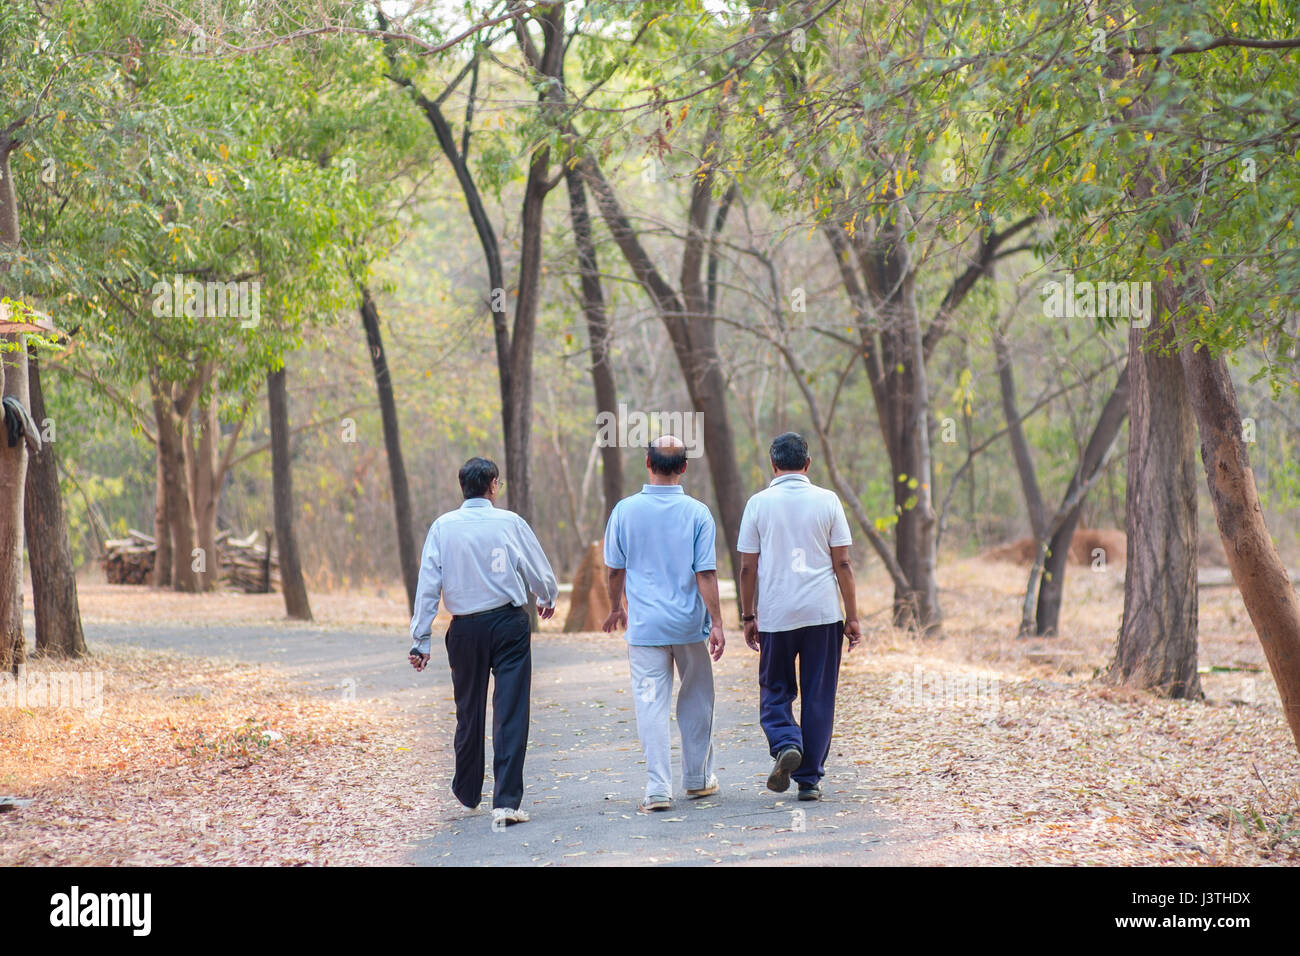 The men walking in a park in Bangalore, India. Stock Photo